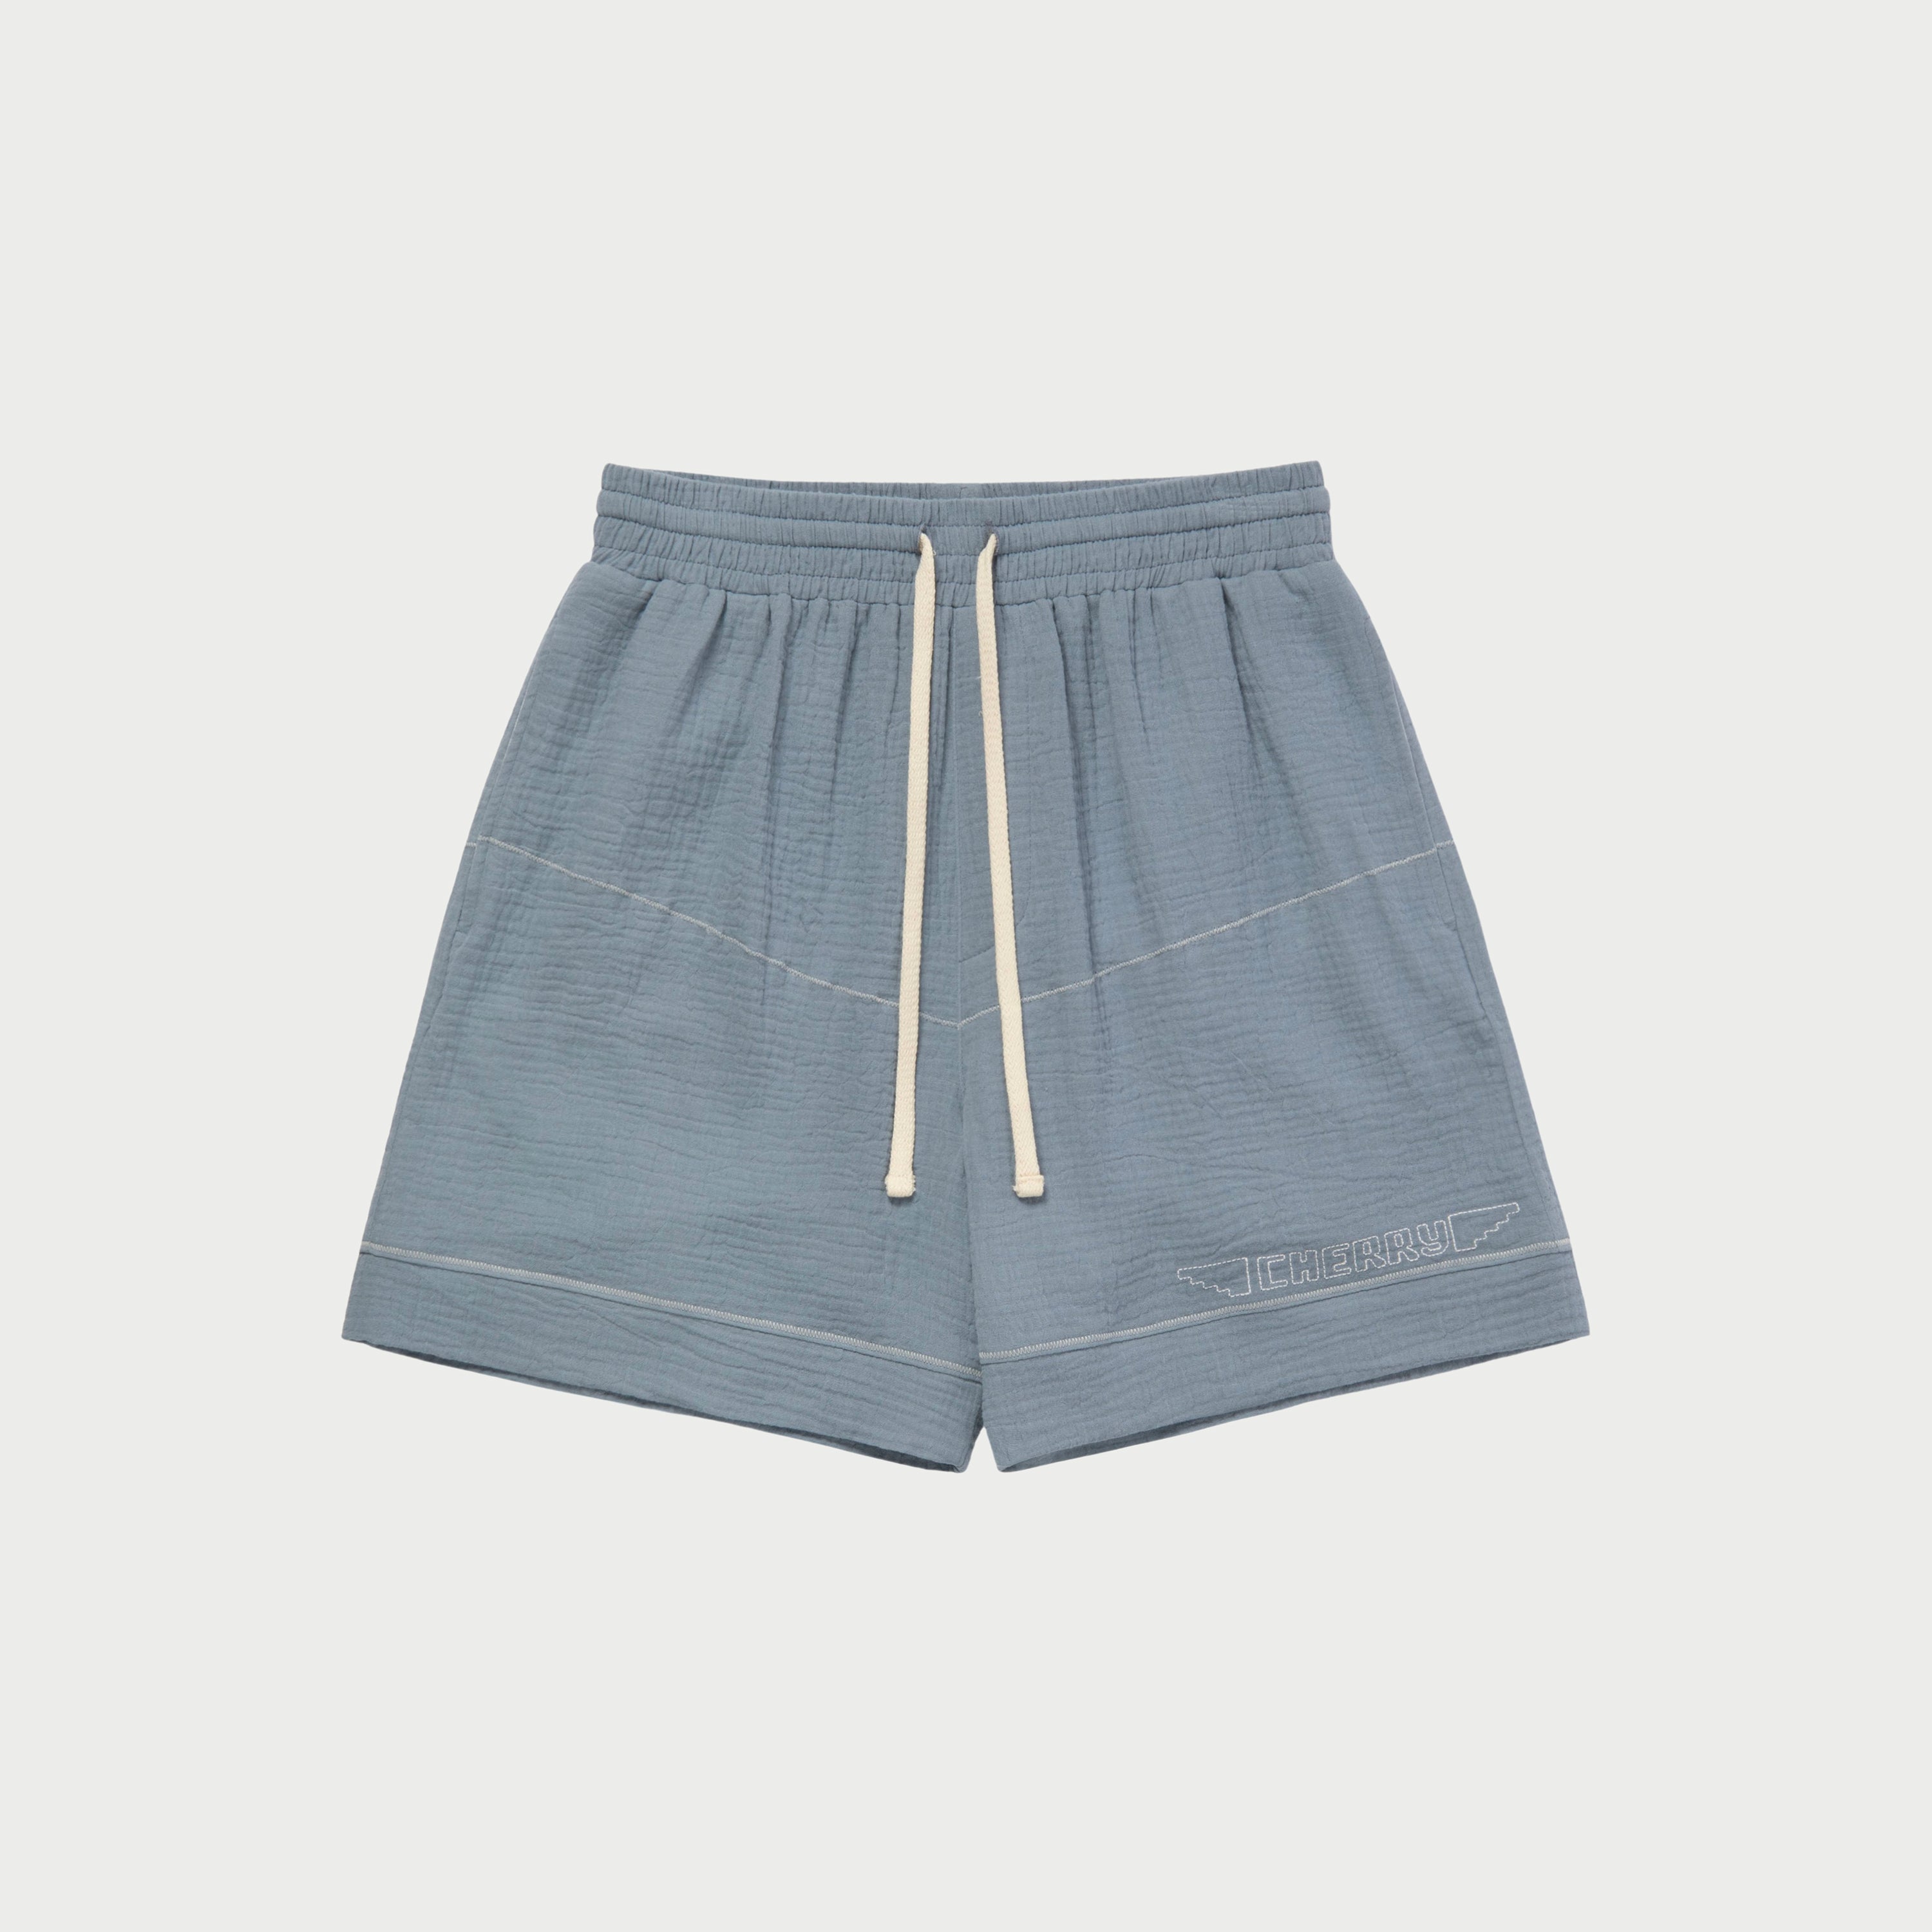 Embroidered Vacation Shorts (Pacific Blue)